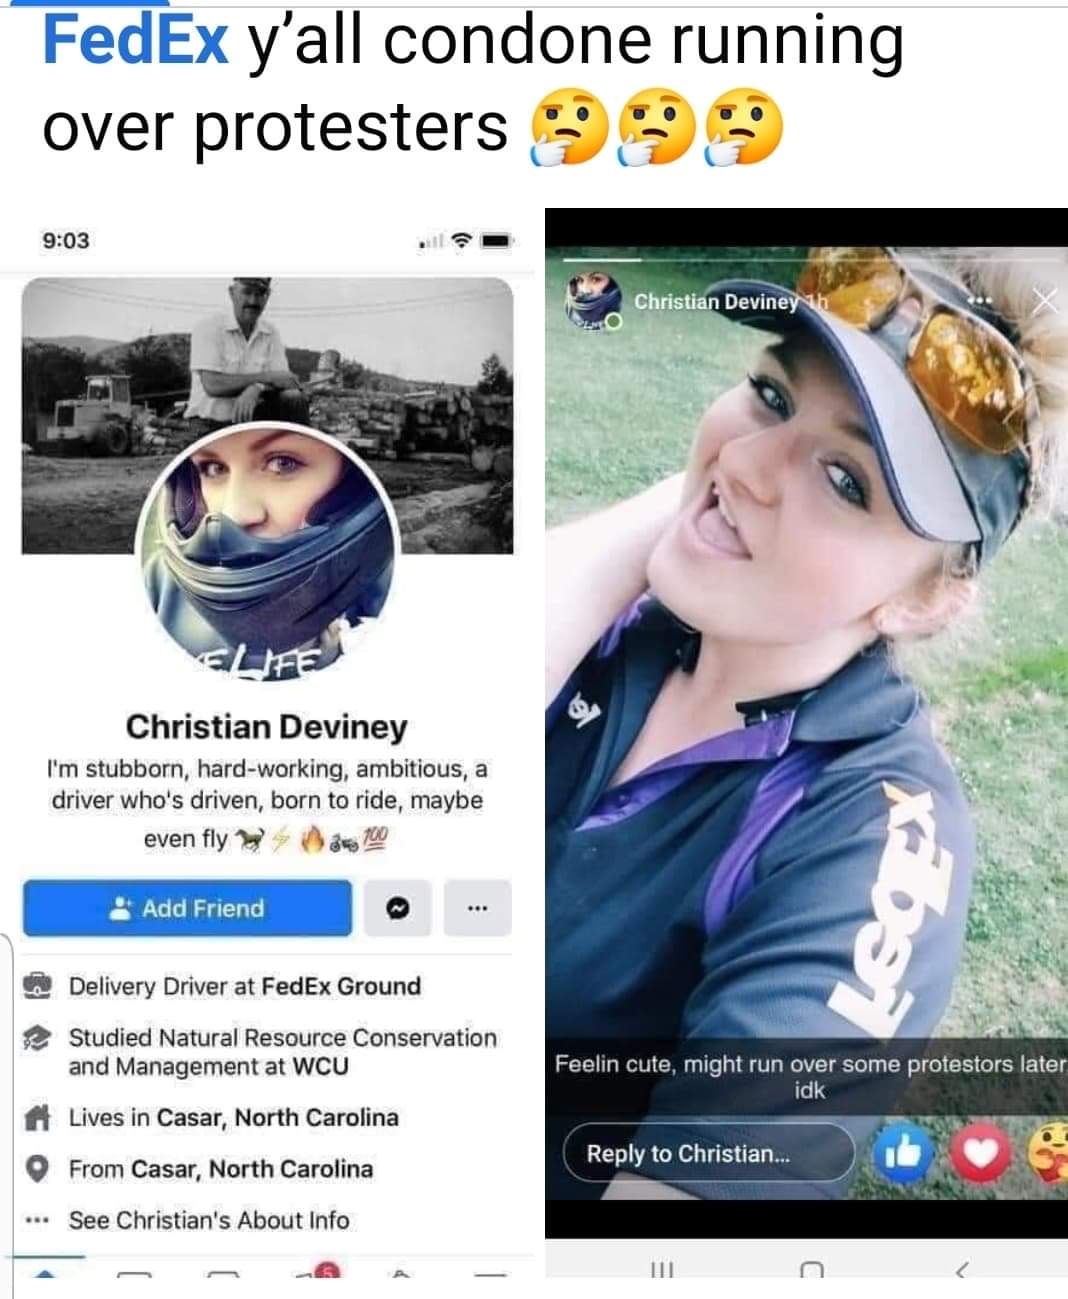 Christian Deviney, a North Carolina FedEx driver, makes cruel joke about the protesting. While on the job, she posted a photo of herself on her Facebook Story. Her caption included her saying that she might run over some protesters later on, indicating she would do so from her FedEx truck, her work truck.